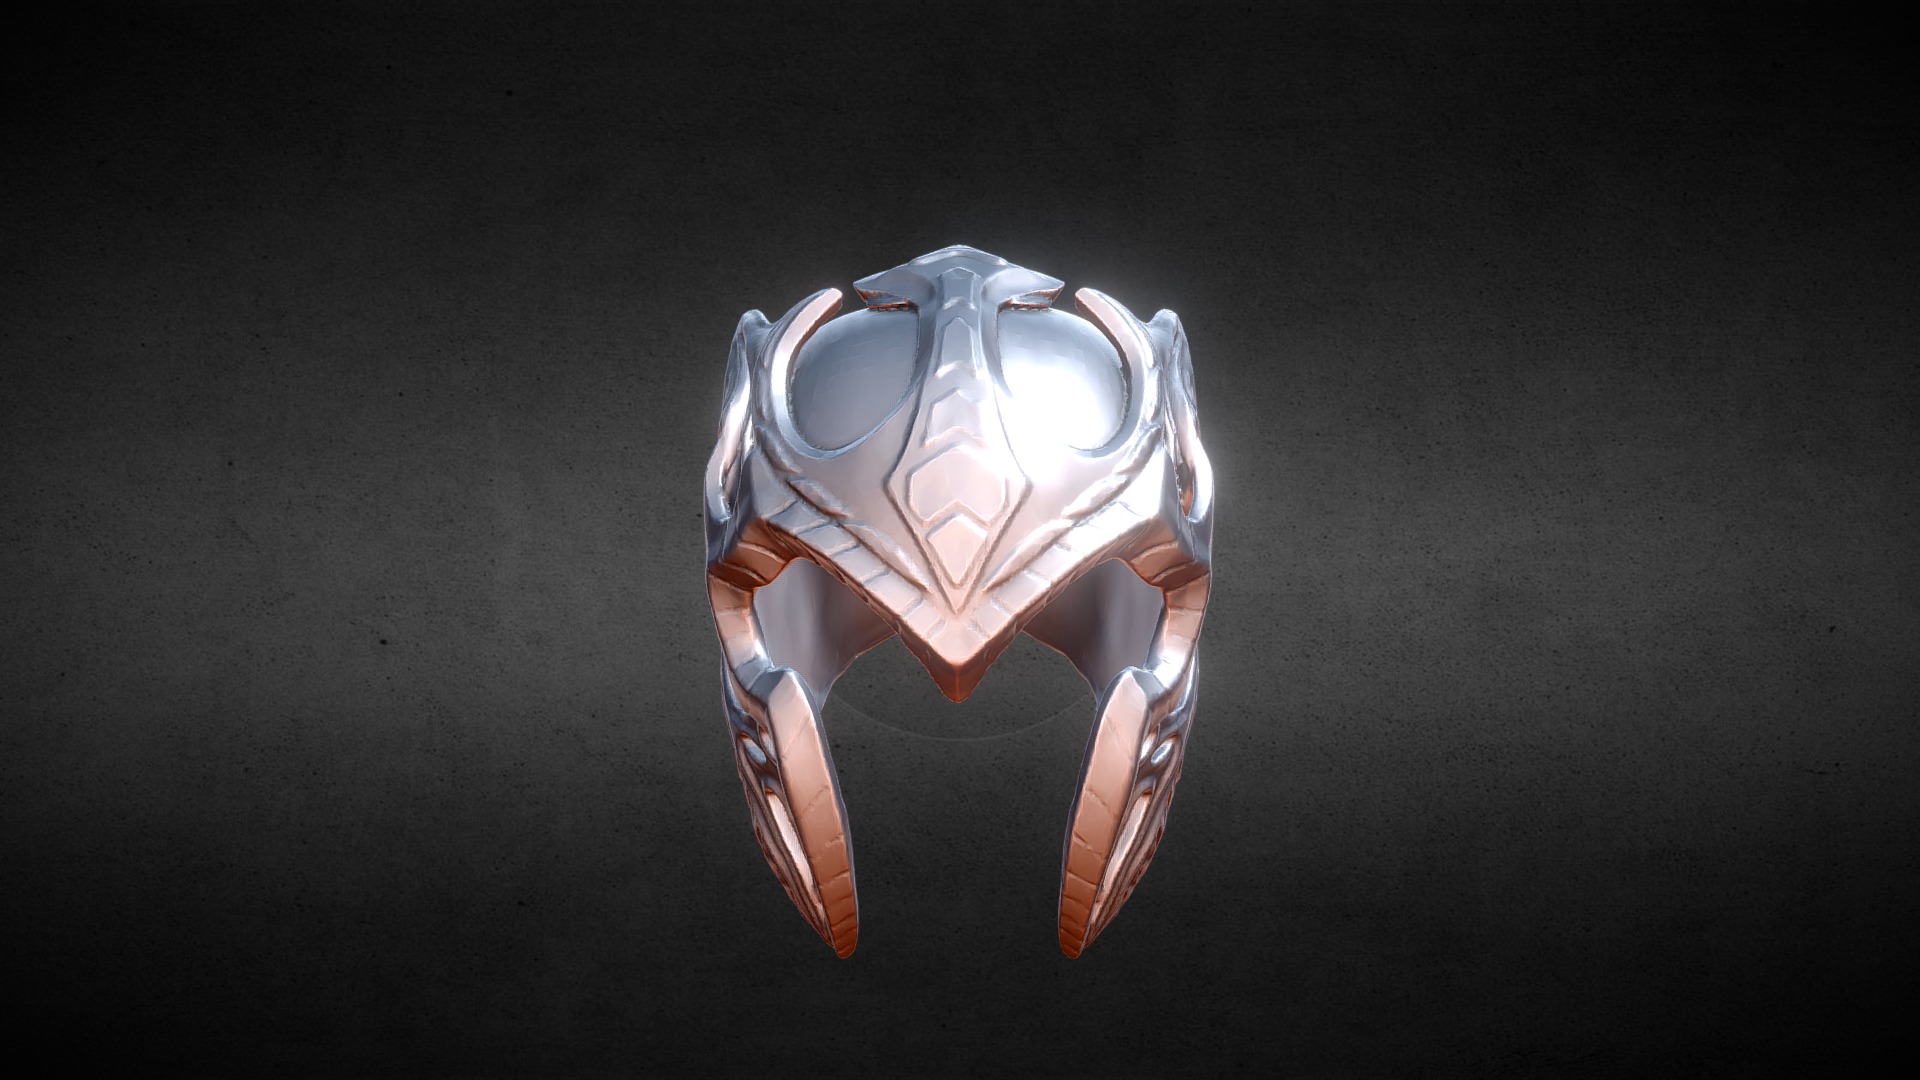 3D model Mặt nạ STEEL – 3D crazy mask - This is a 3D model of the Mặt nạ STEEL - 3D crazy mask. The 3D model is about a close-up of a ring.